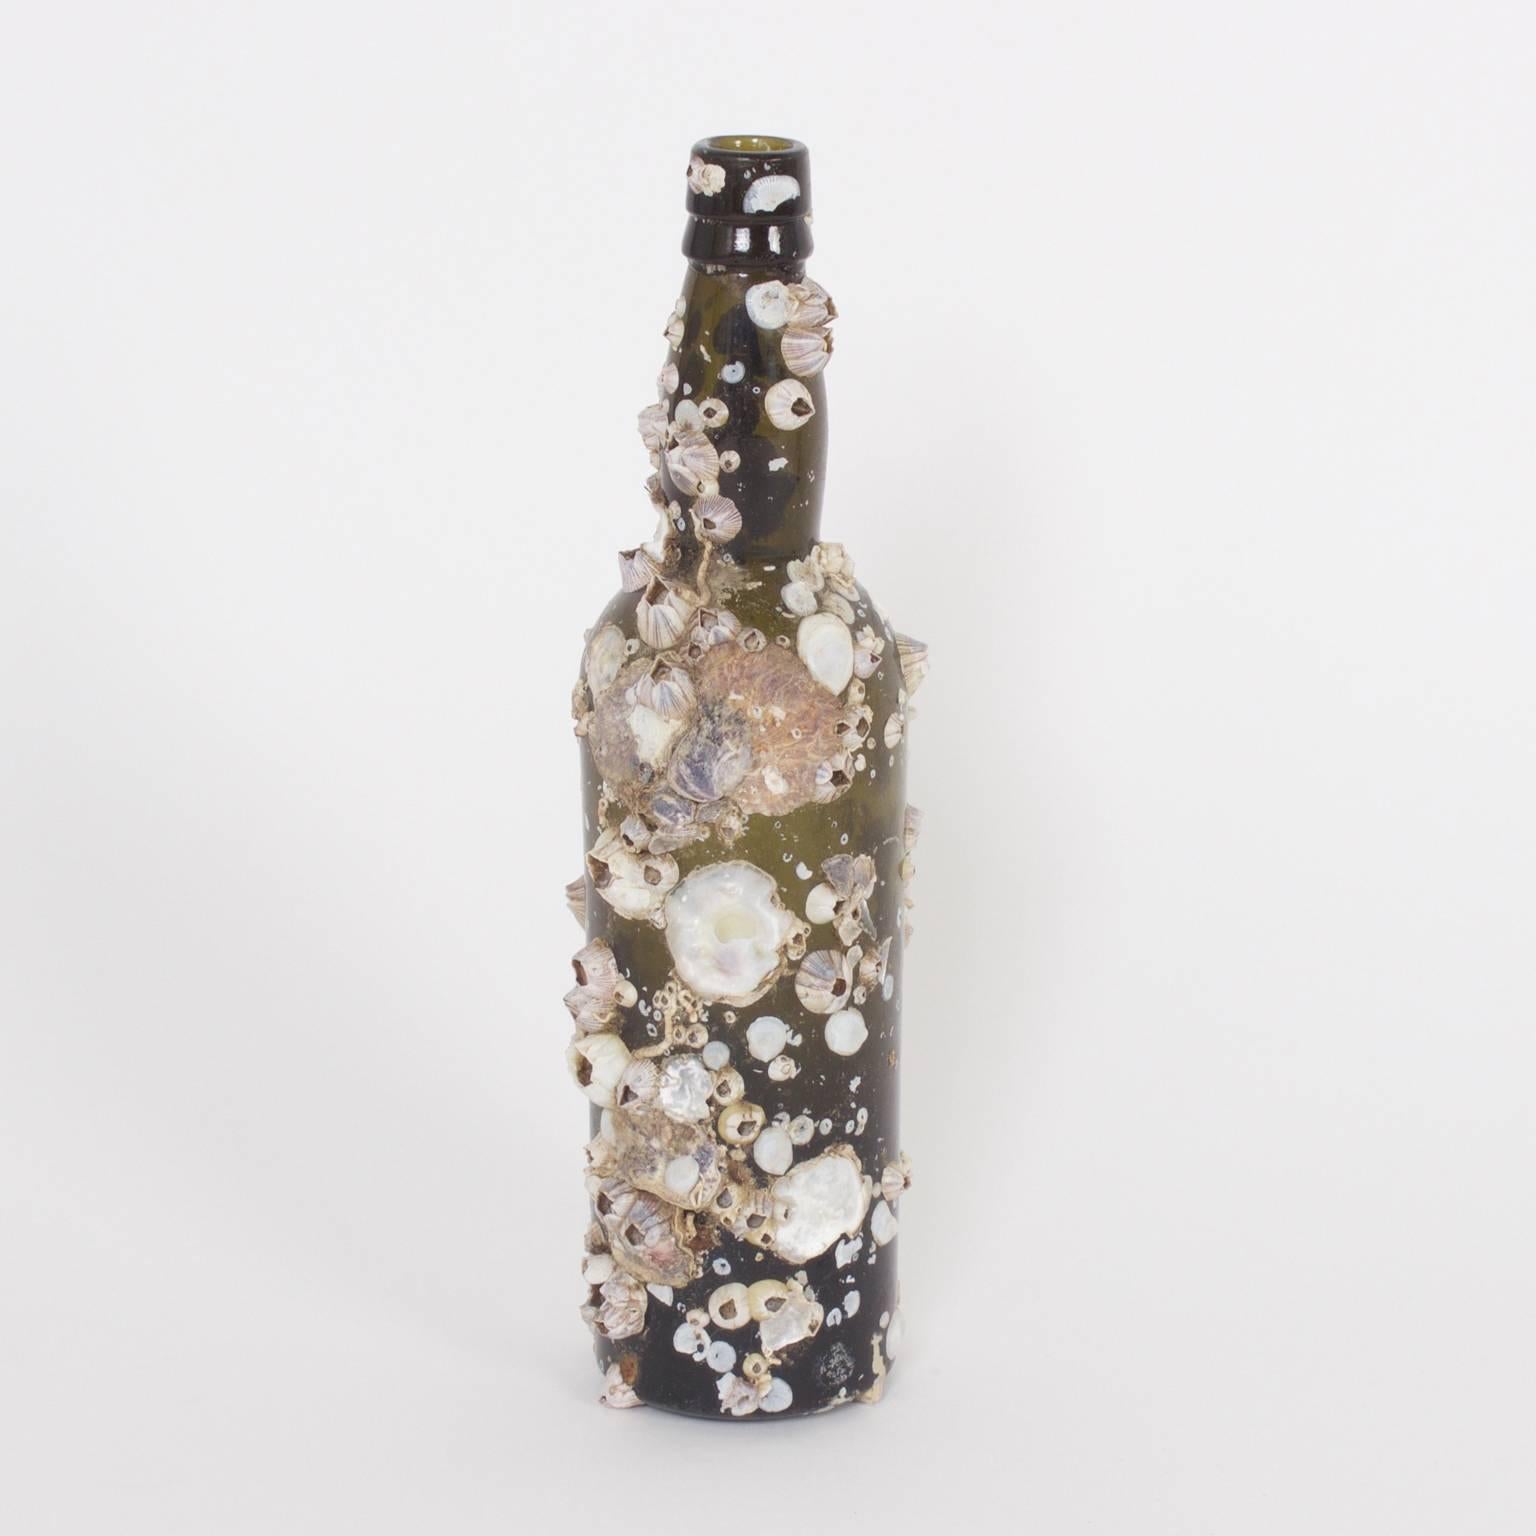 Set of four barnacle encrusted vintage bottles recovered while diving off the coast of Florida. Fill in your own history. Priced individually.

From left to right

Height: 12 $525.00.
Height: 9 $425.00.
Height: 14 $425.00.
Height: 10